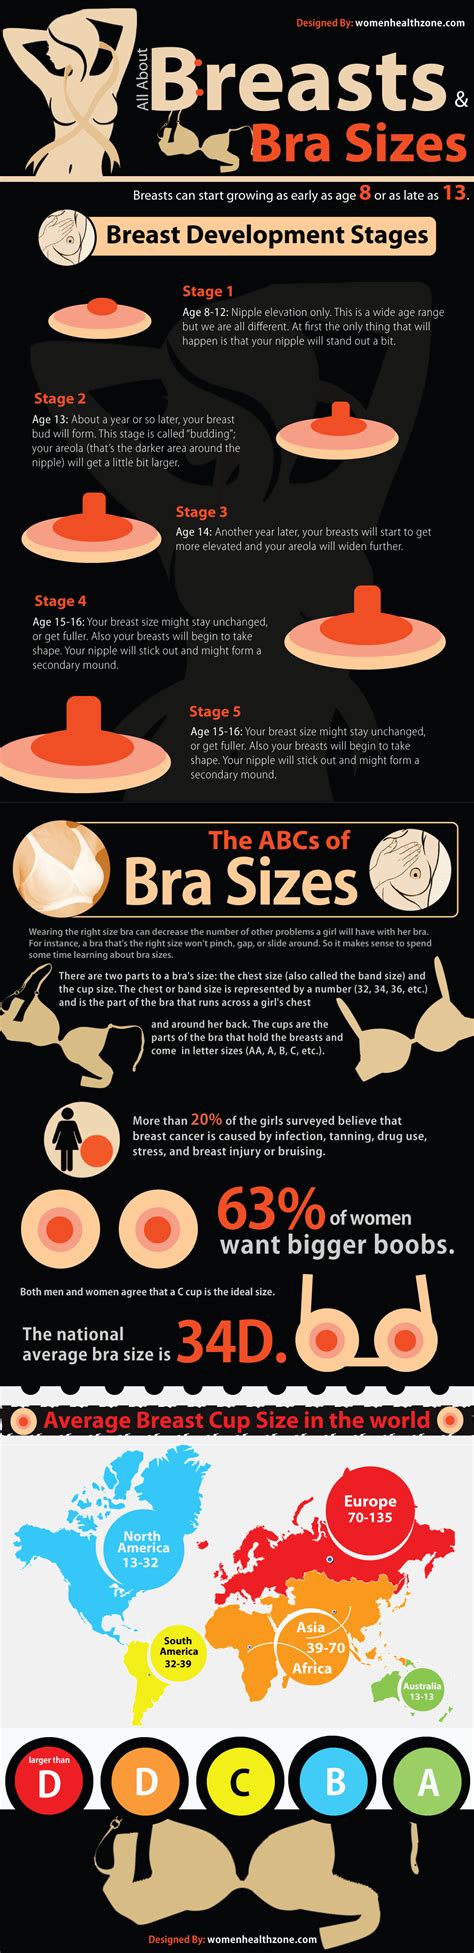 Breast And Bra Sizes Infographic Breast Sizes